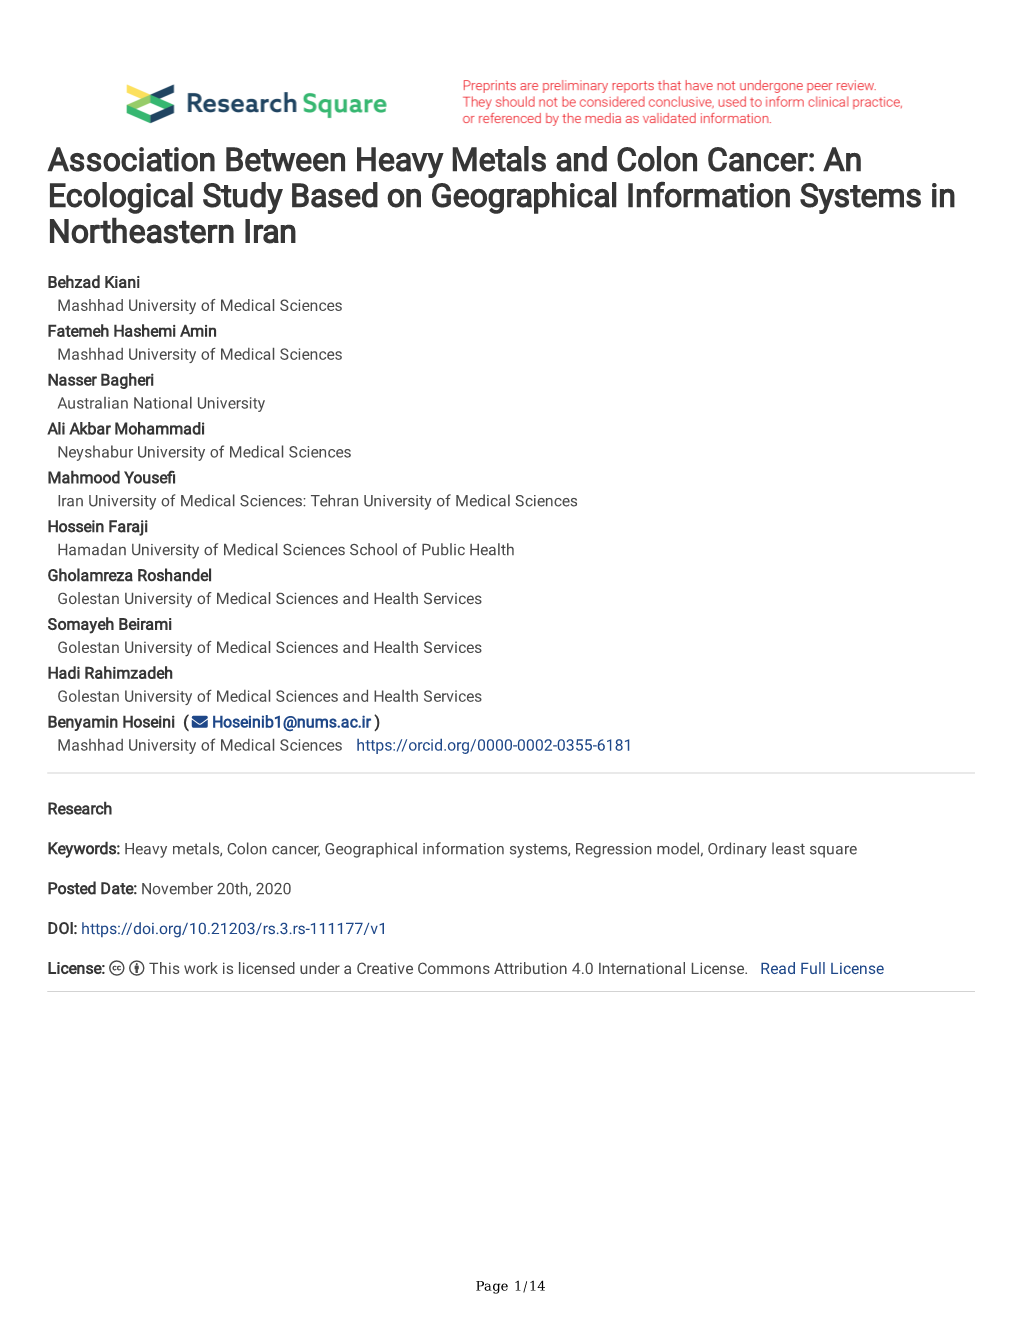 Association Between Heavy Metals and Colon Cancer: an Ecological Study Based on Geographical Information Systems in Northeastern Iran